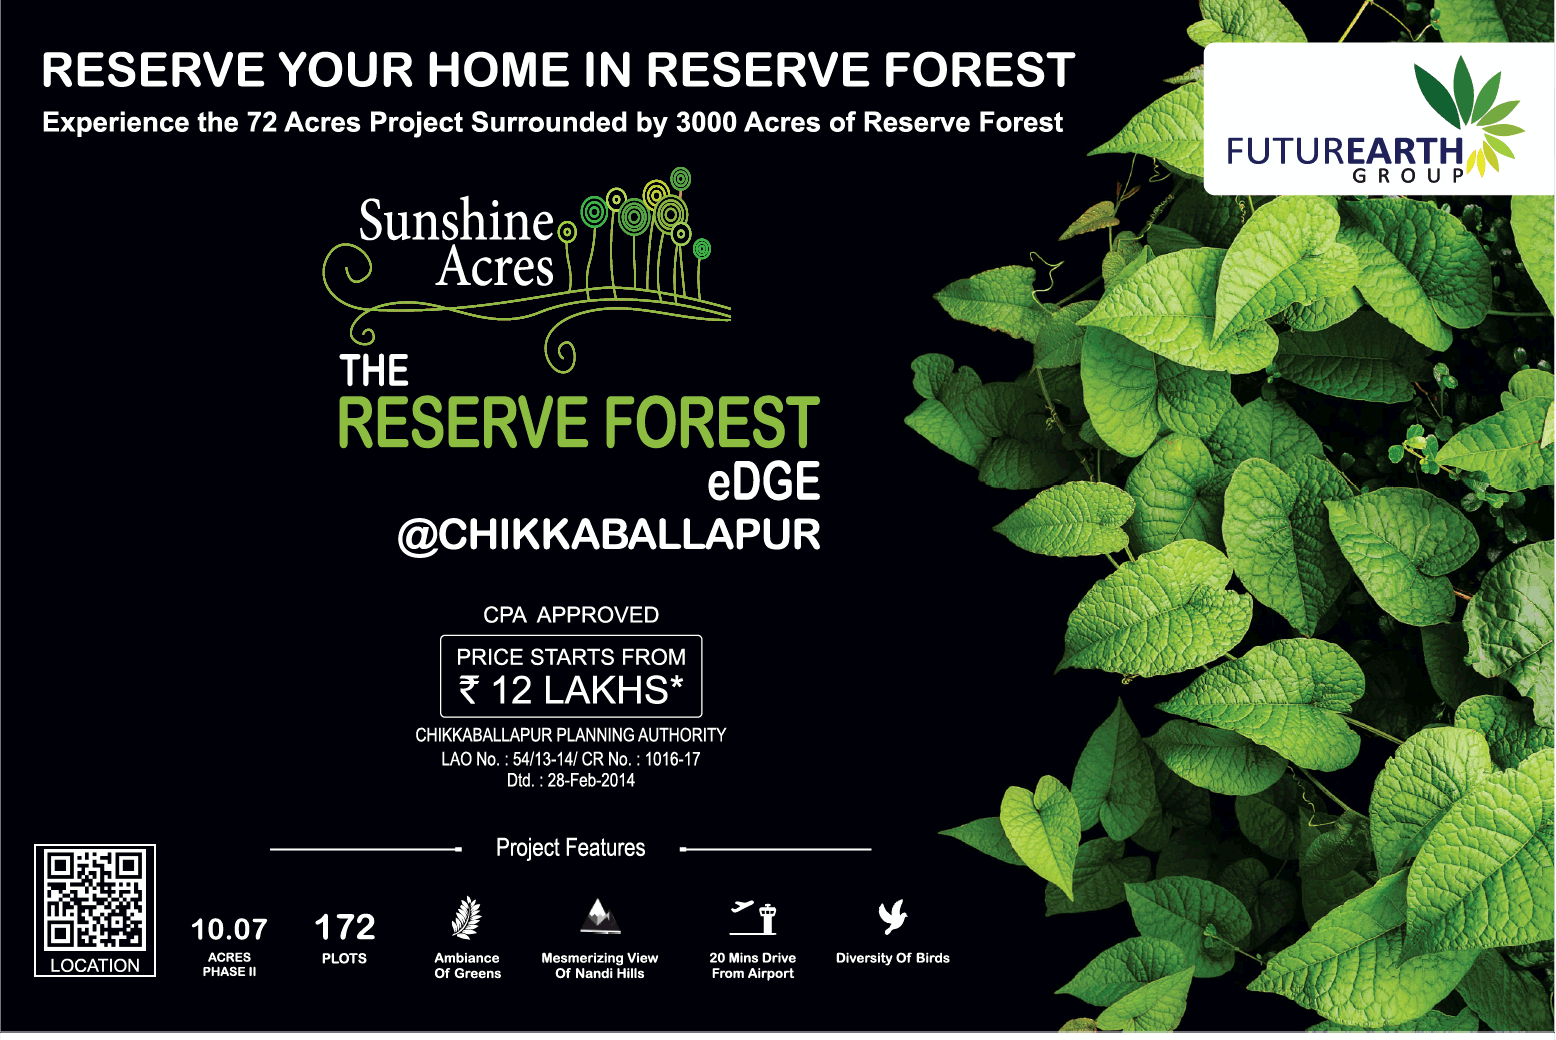 Experience the 72 acres project surrounded by 3000 acres of reserve forest at Sunshine Acres, Bangalore